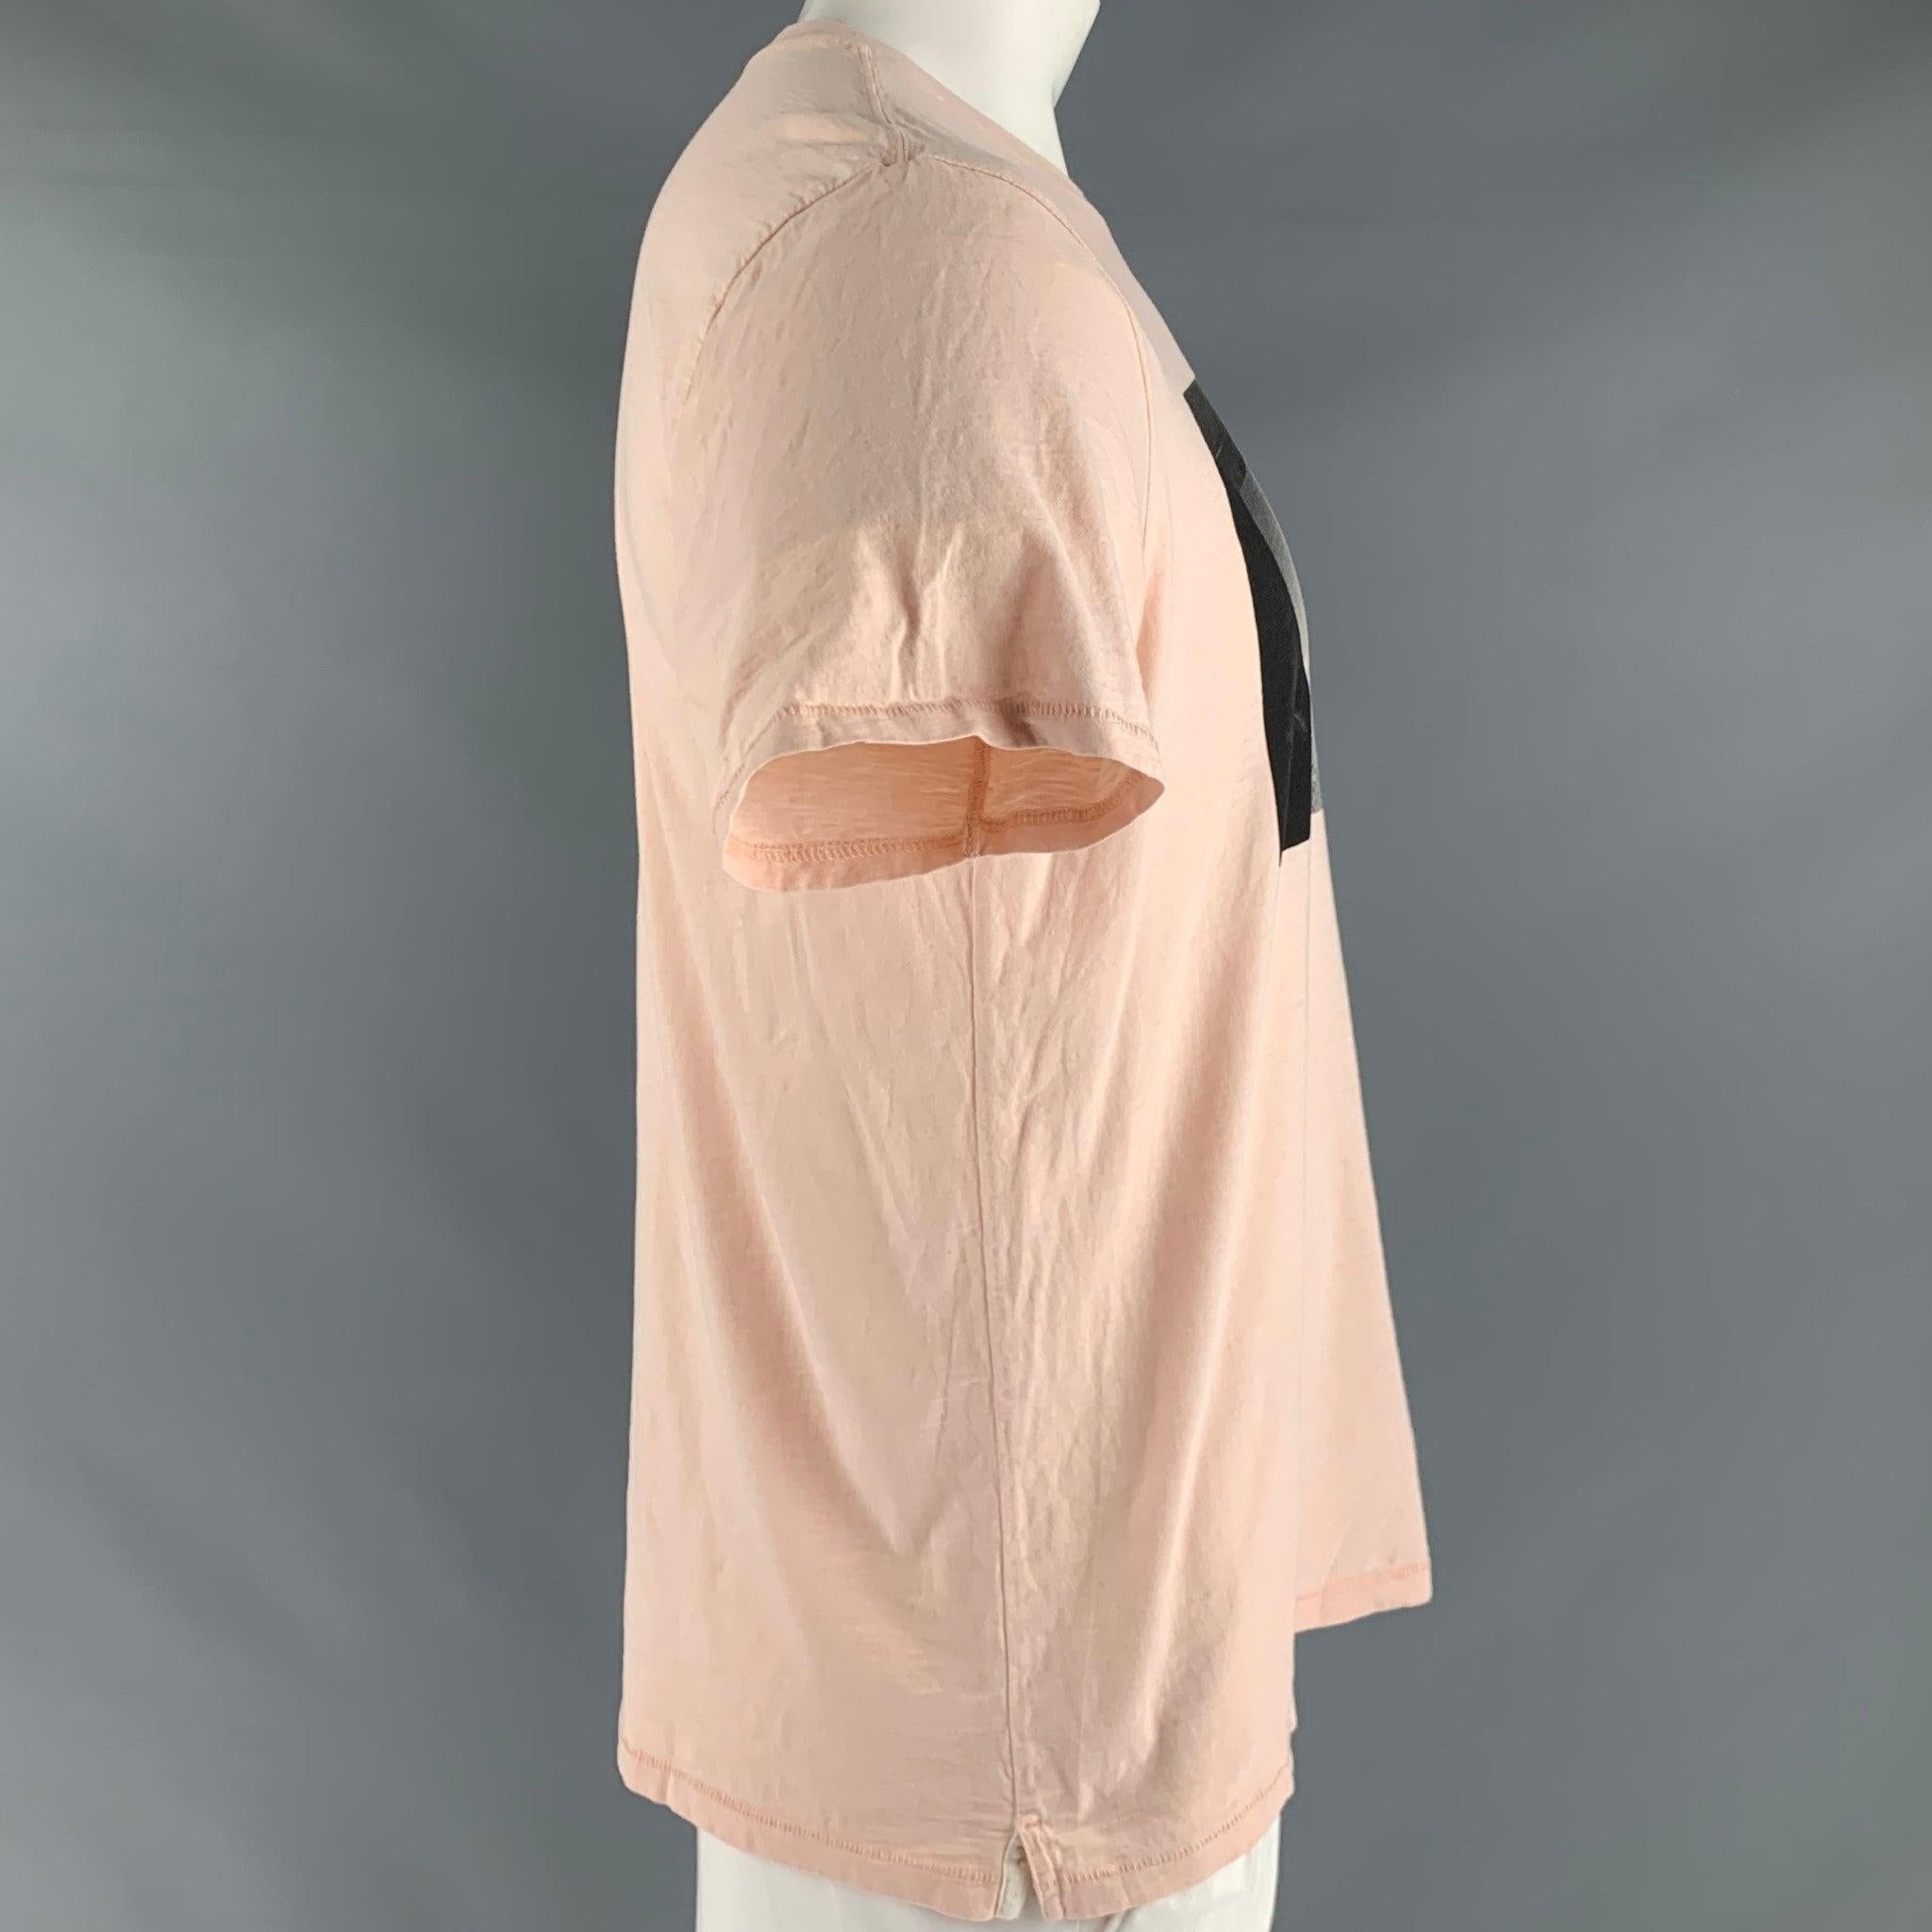 RAG & BONE t-shirt
in a
pink cotton fabric featuring monochromatic graphic, short sleeves, and a crew neck.Very Good Pre-Owned Condition. Minor signs of wear. 

Marked:   L/G 

Measurements: 
 
Shoulder: 19 inches  Chest: 44 inches  Sleeve: 8.5